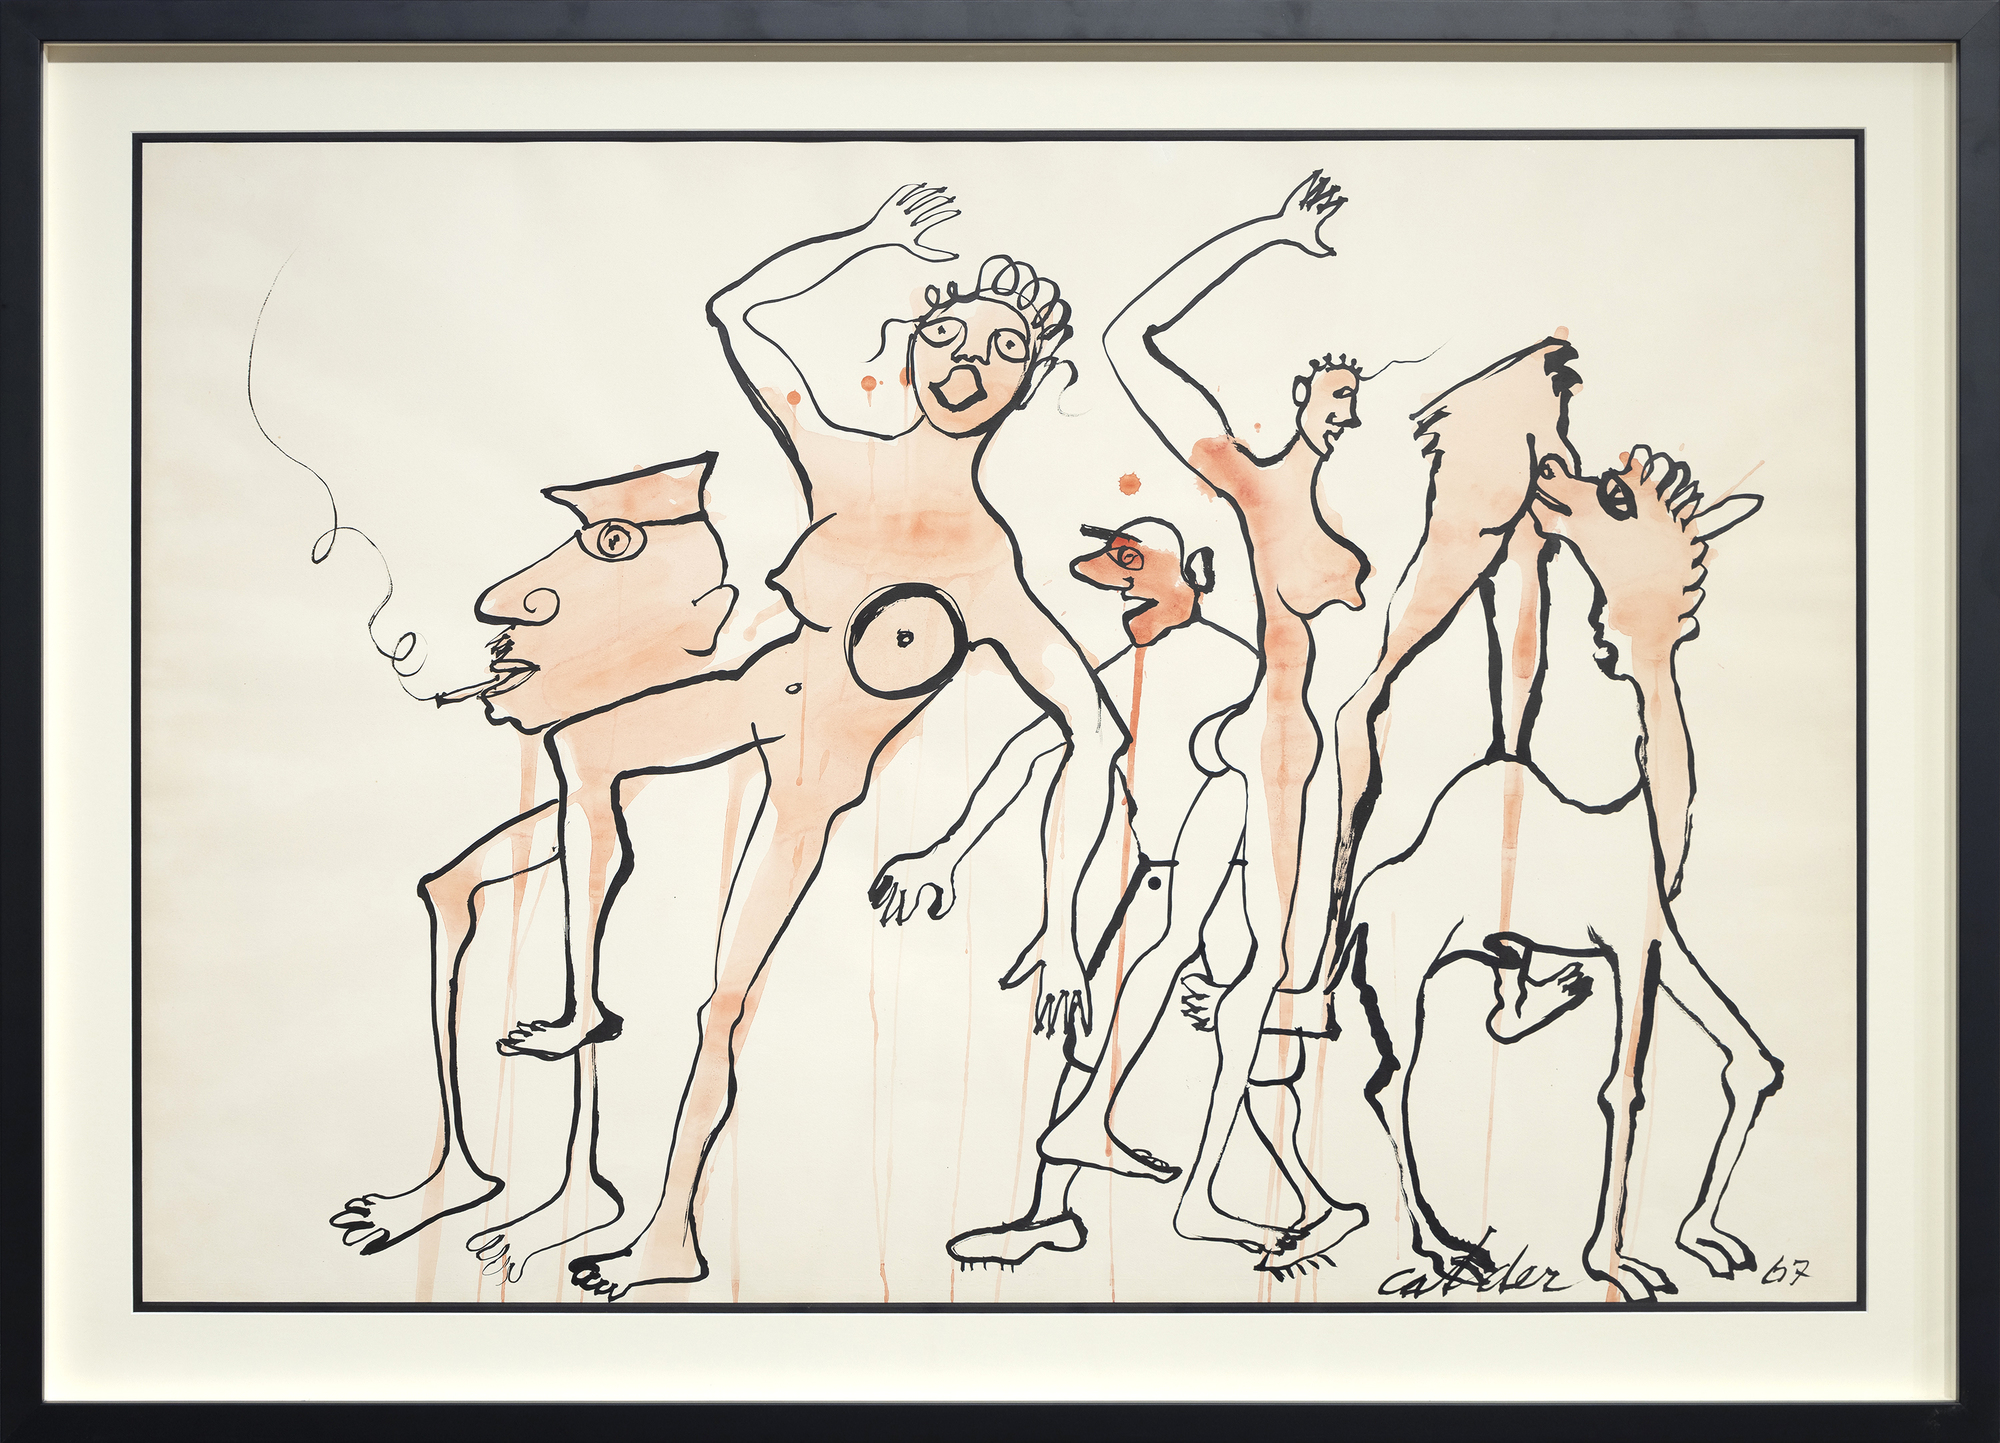 Well known for his candor and pragmatic sensibility, Alexander Calder was as direct, ingenious, and straight to the point in life as he was in his art. “Personnages”, for example, is unabashedly dynamic, a work that recalls his early love of the action of the circus as well as his insights into human nature. The character of “Personnages” suggests a spontaneous drawing-in-space, recalling his radical wire sculptures of the 1920s.<br>© 2023 Calder Foundation, New York / Artists Rights Society (ARS), New York